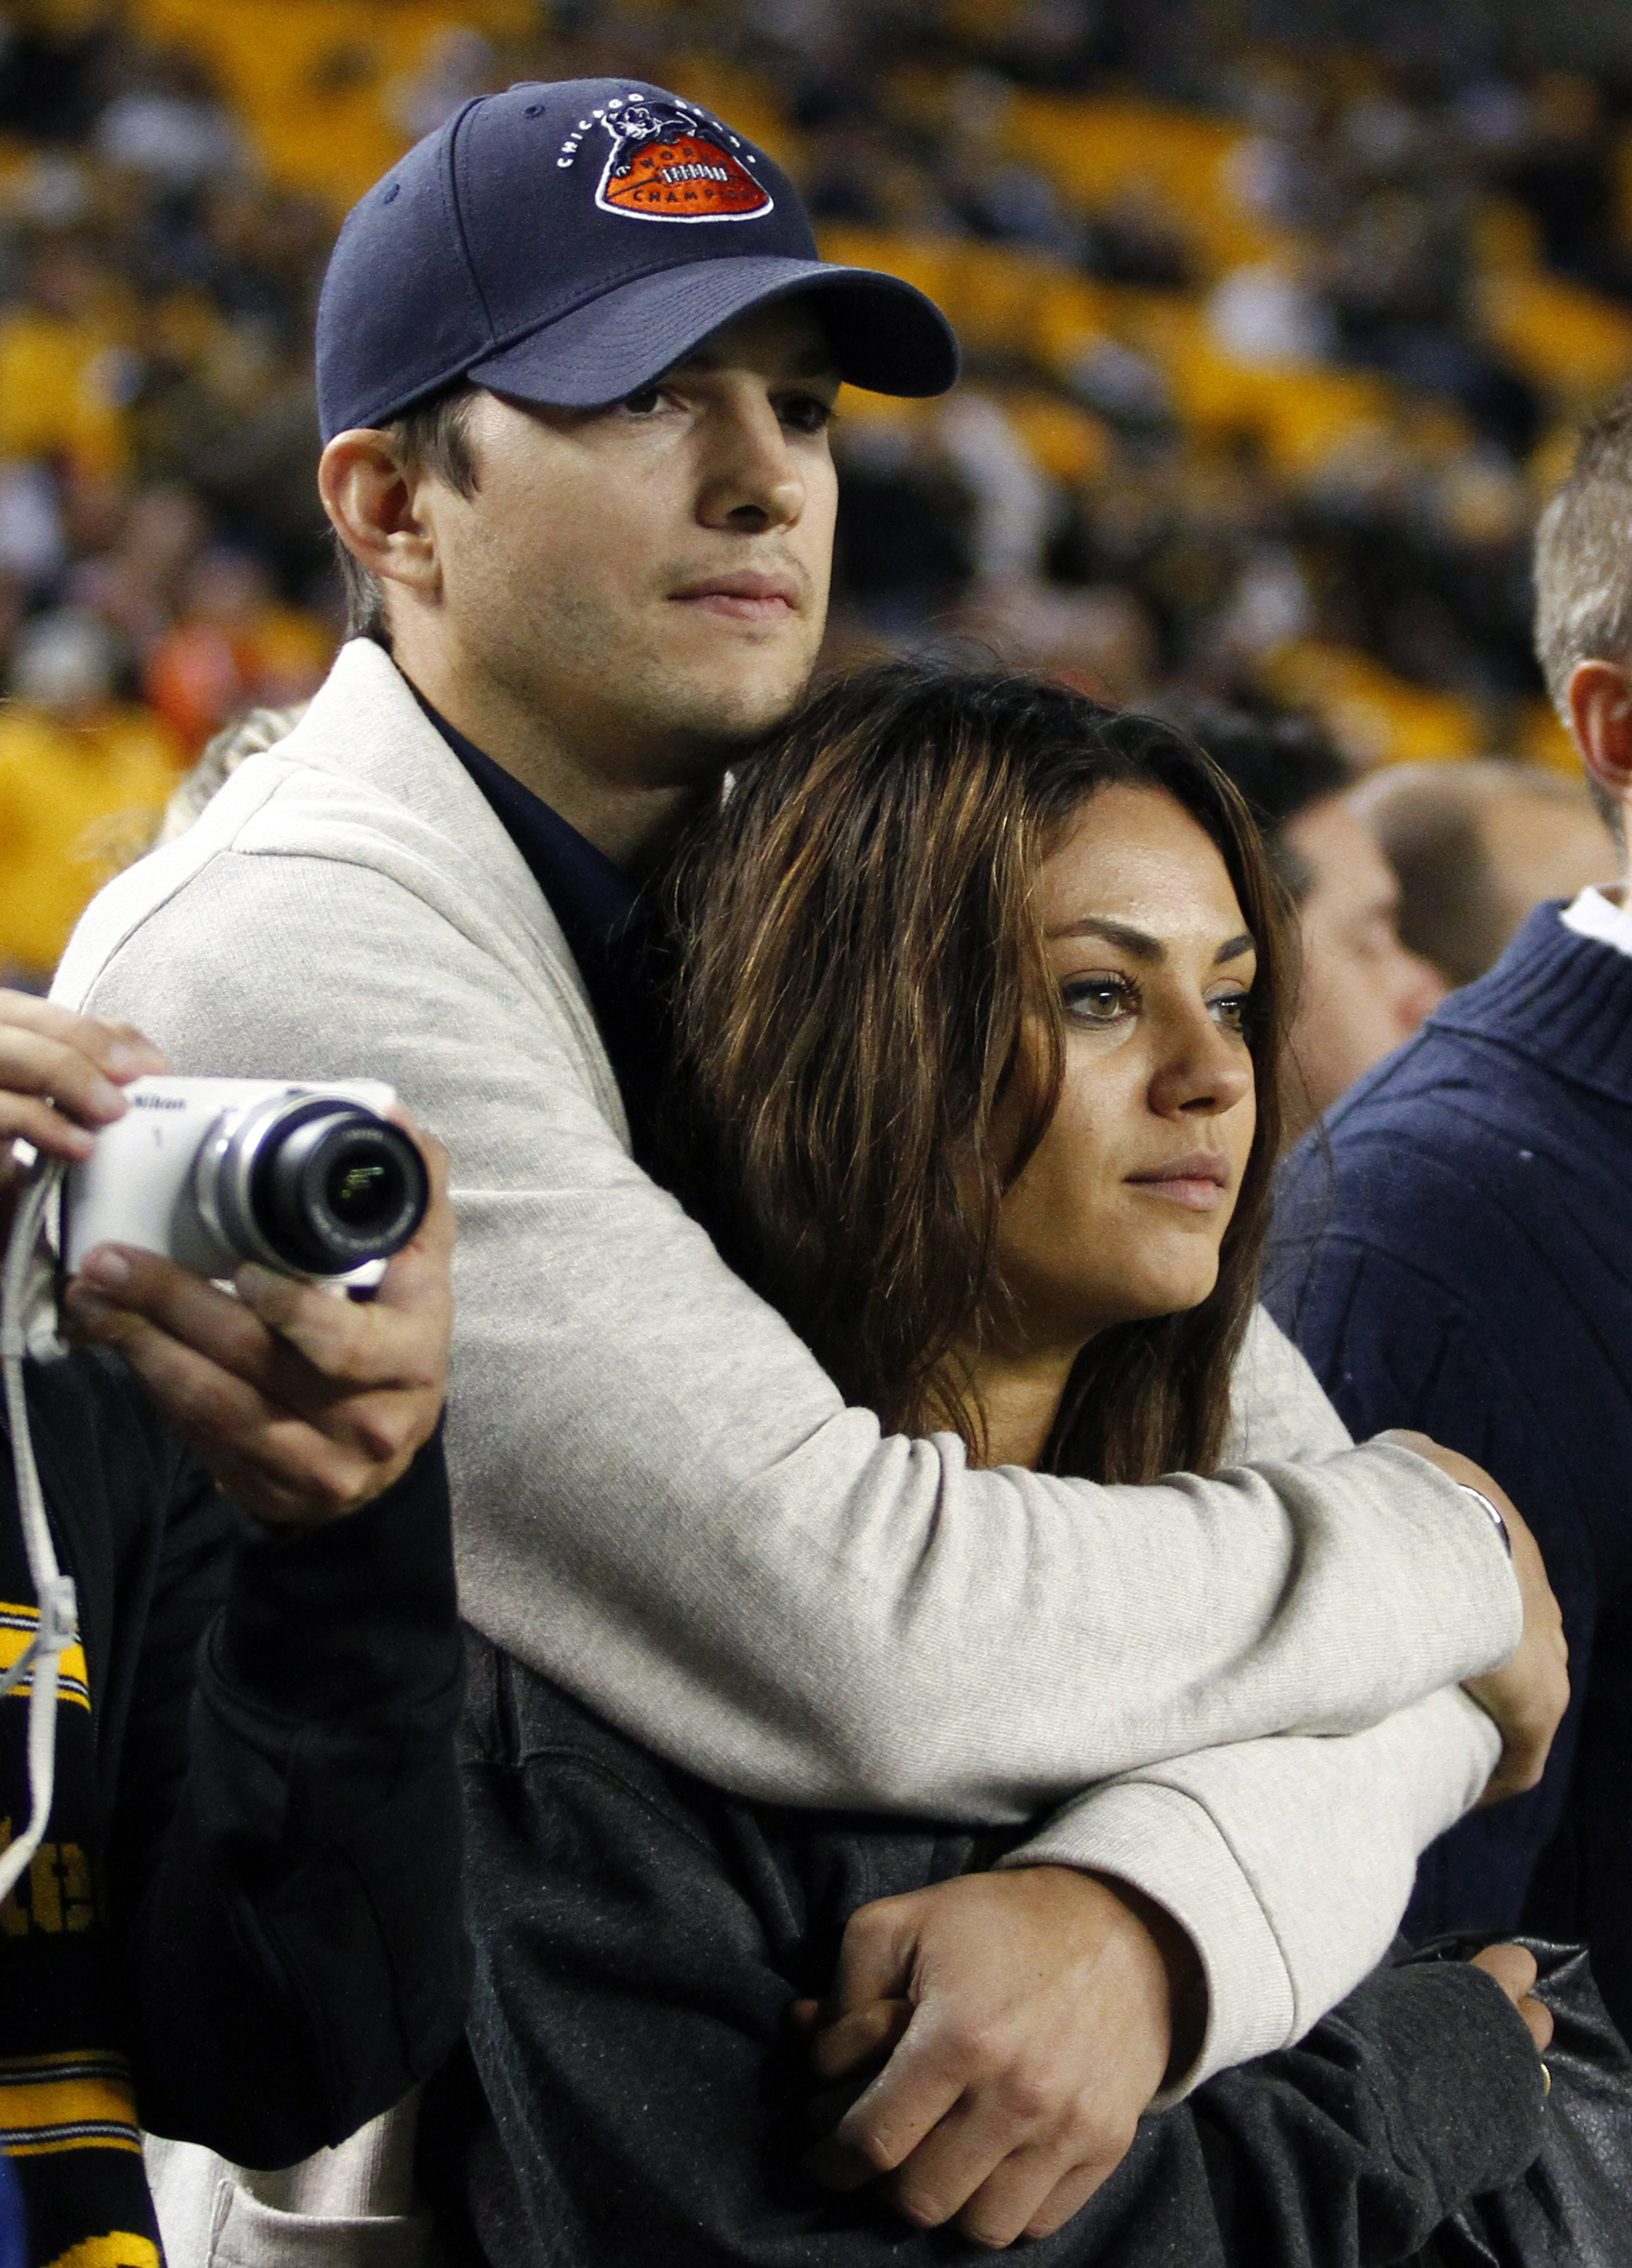 Ashton Kutcher and Mila Kunis pictured at Heinz Field on September 22, 2013 in Pittsburgh, Pennsylvania | Source: Getty Images